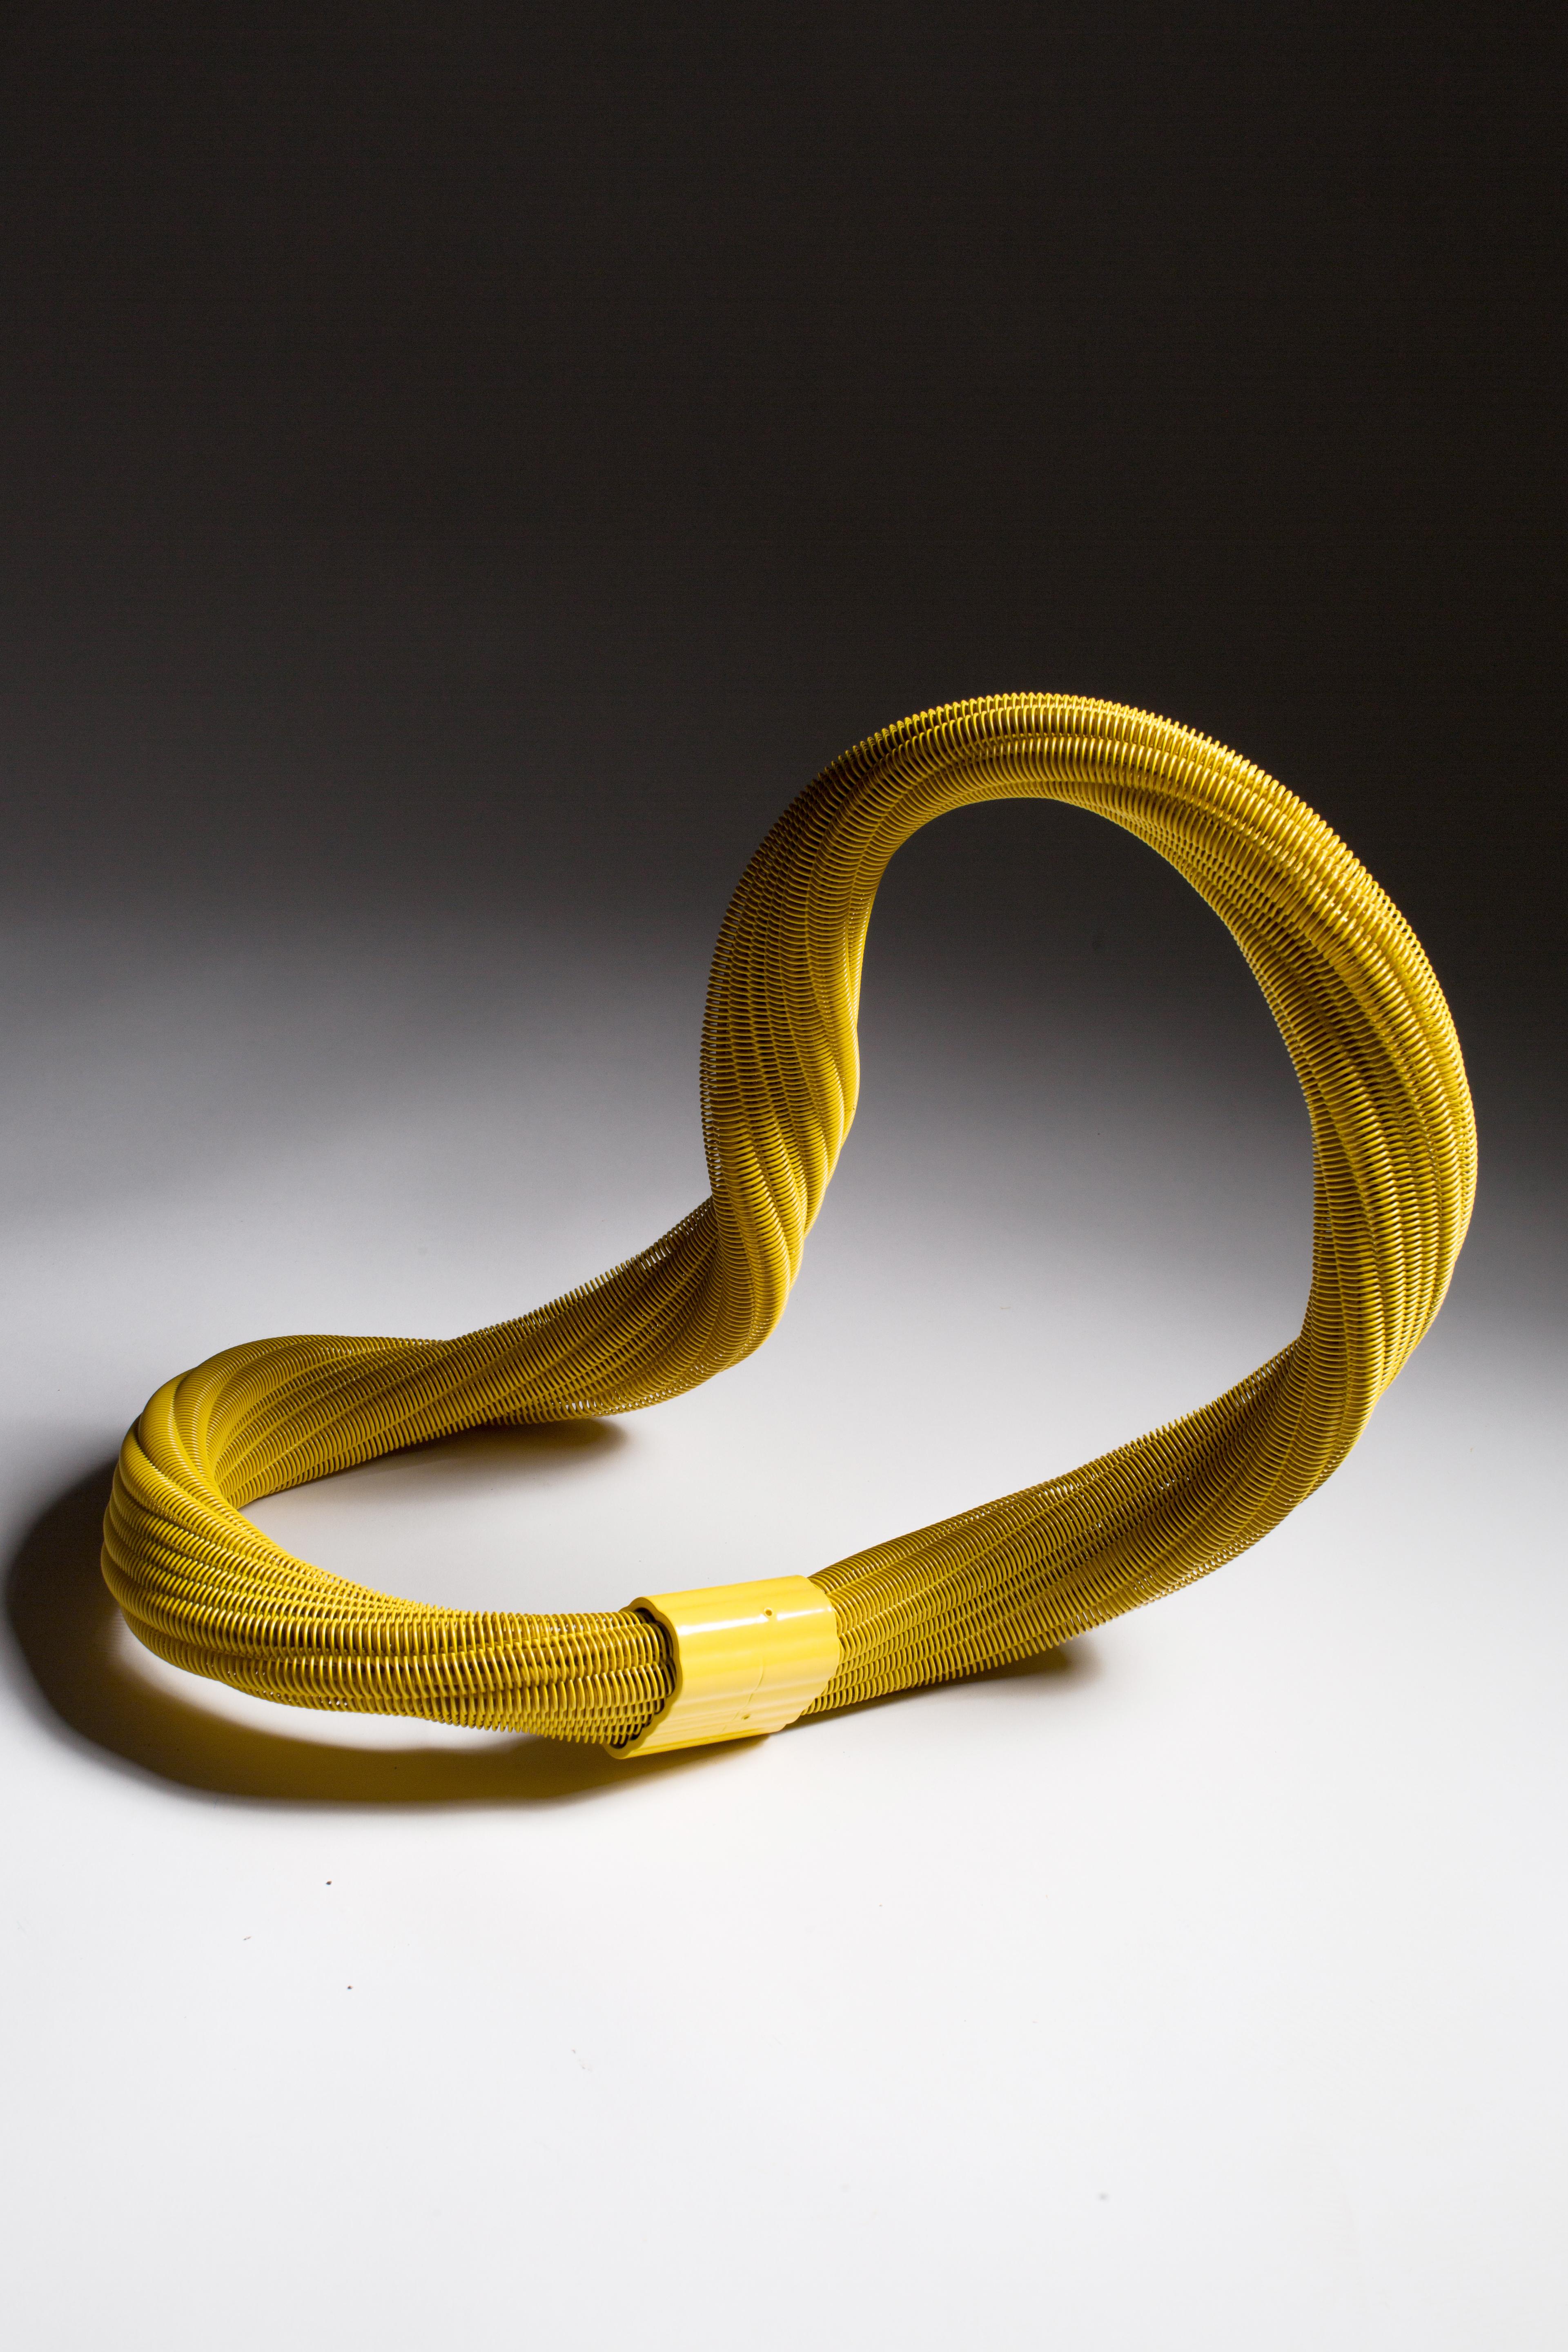 Yellow, Powder Coating, Wire, Steel, Abstract, Contemporary, Modern, Sculpture 2